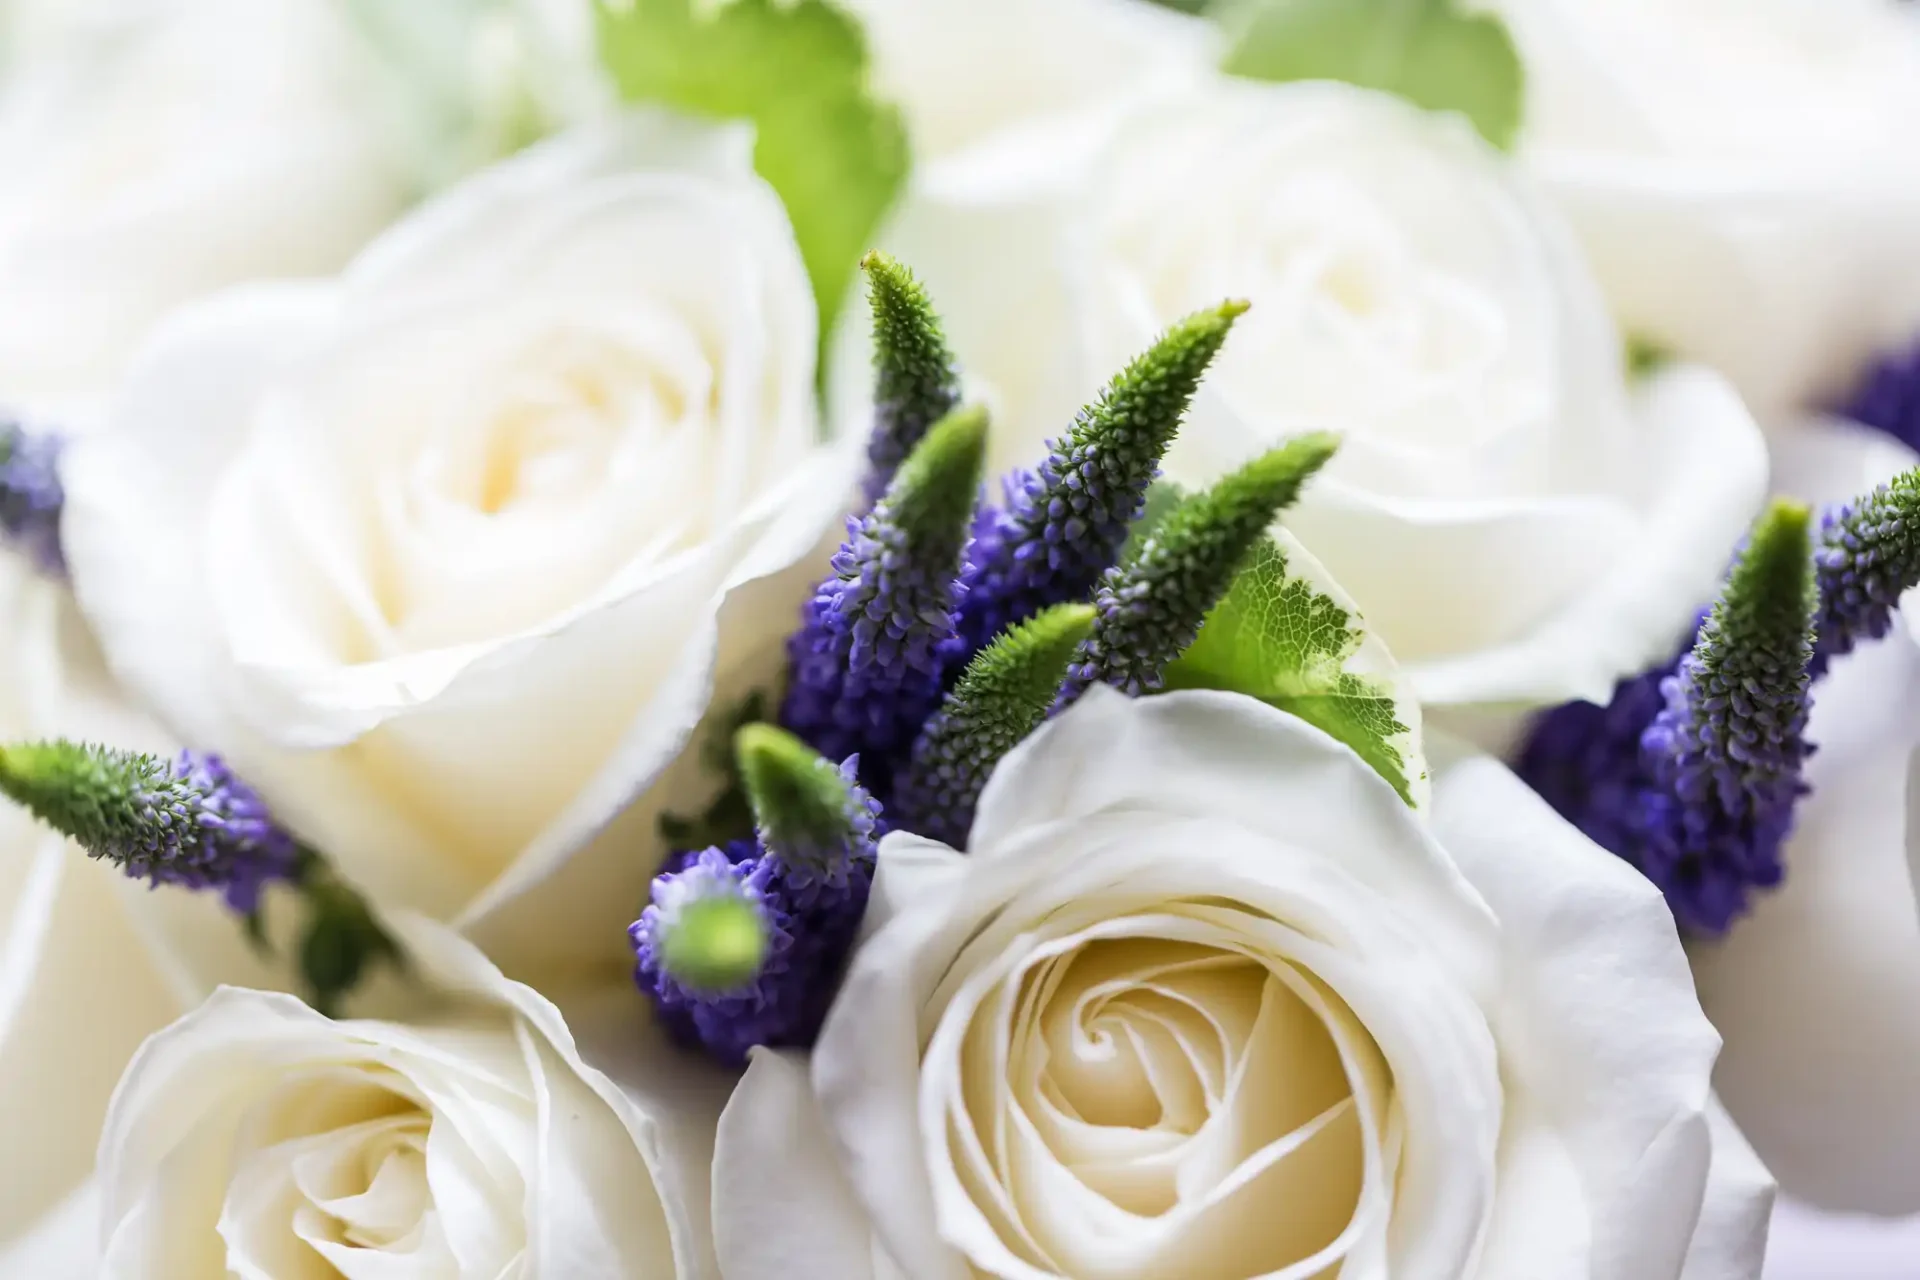 Close-up of white roses and purple veronica flowers in a floral arrangement.